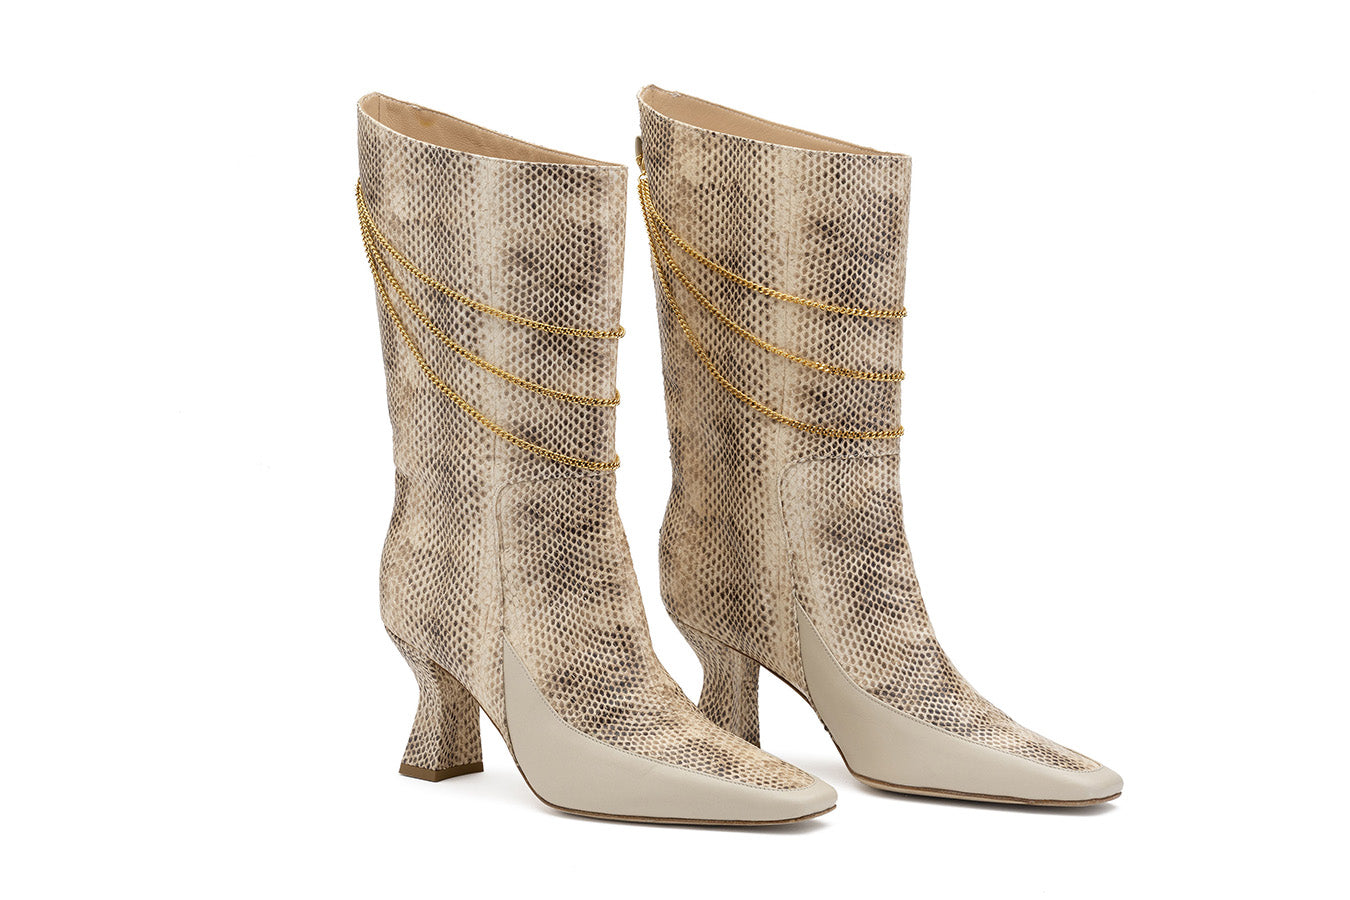 Naomi Print women's Python boots shot at an angle from the front on white background